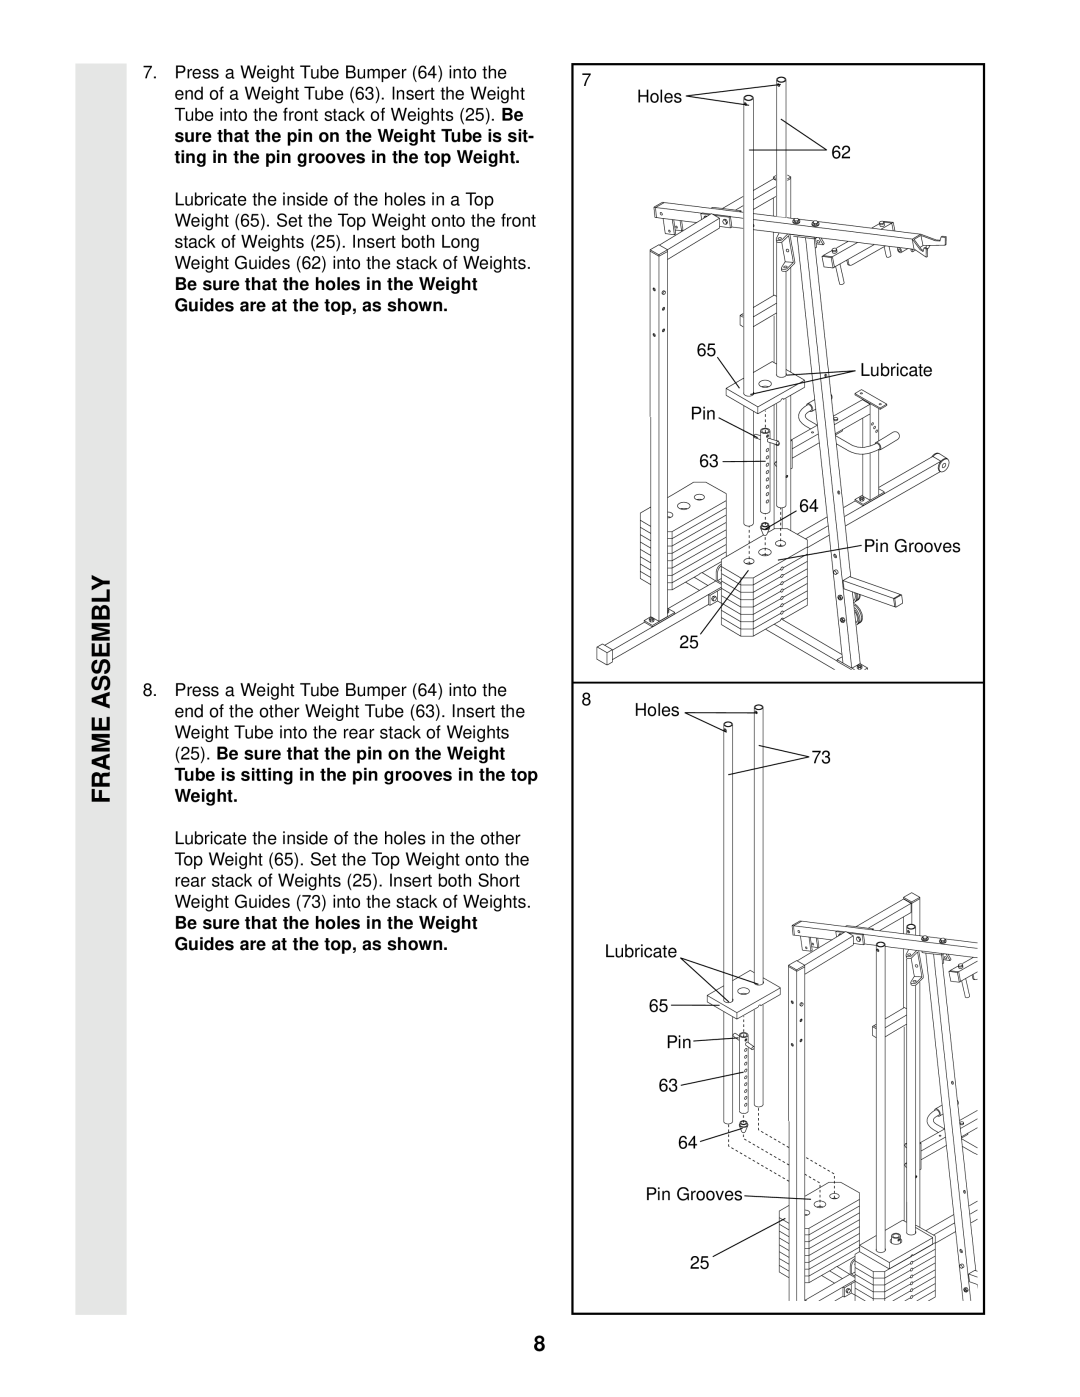 Weider WESY96400 user manual Frame Assembly, Be sure that the holes in the Weight Guides are at the top, as shown 